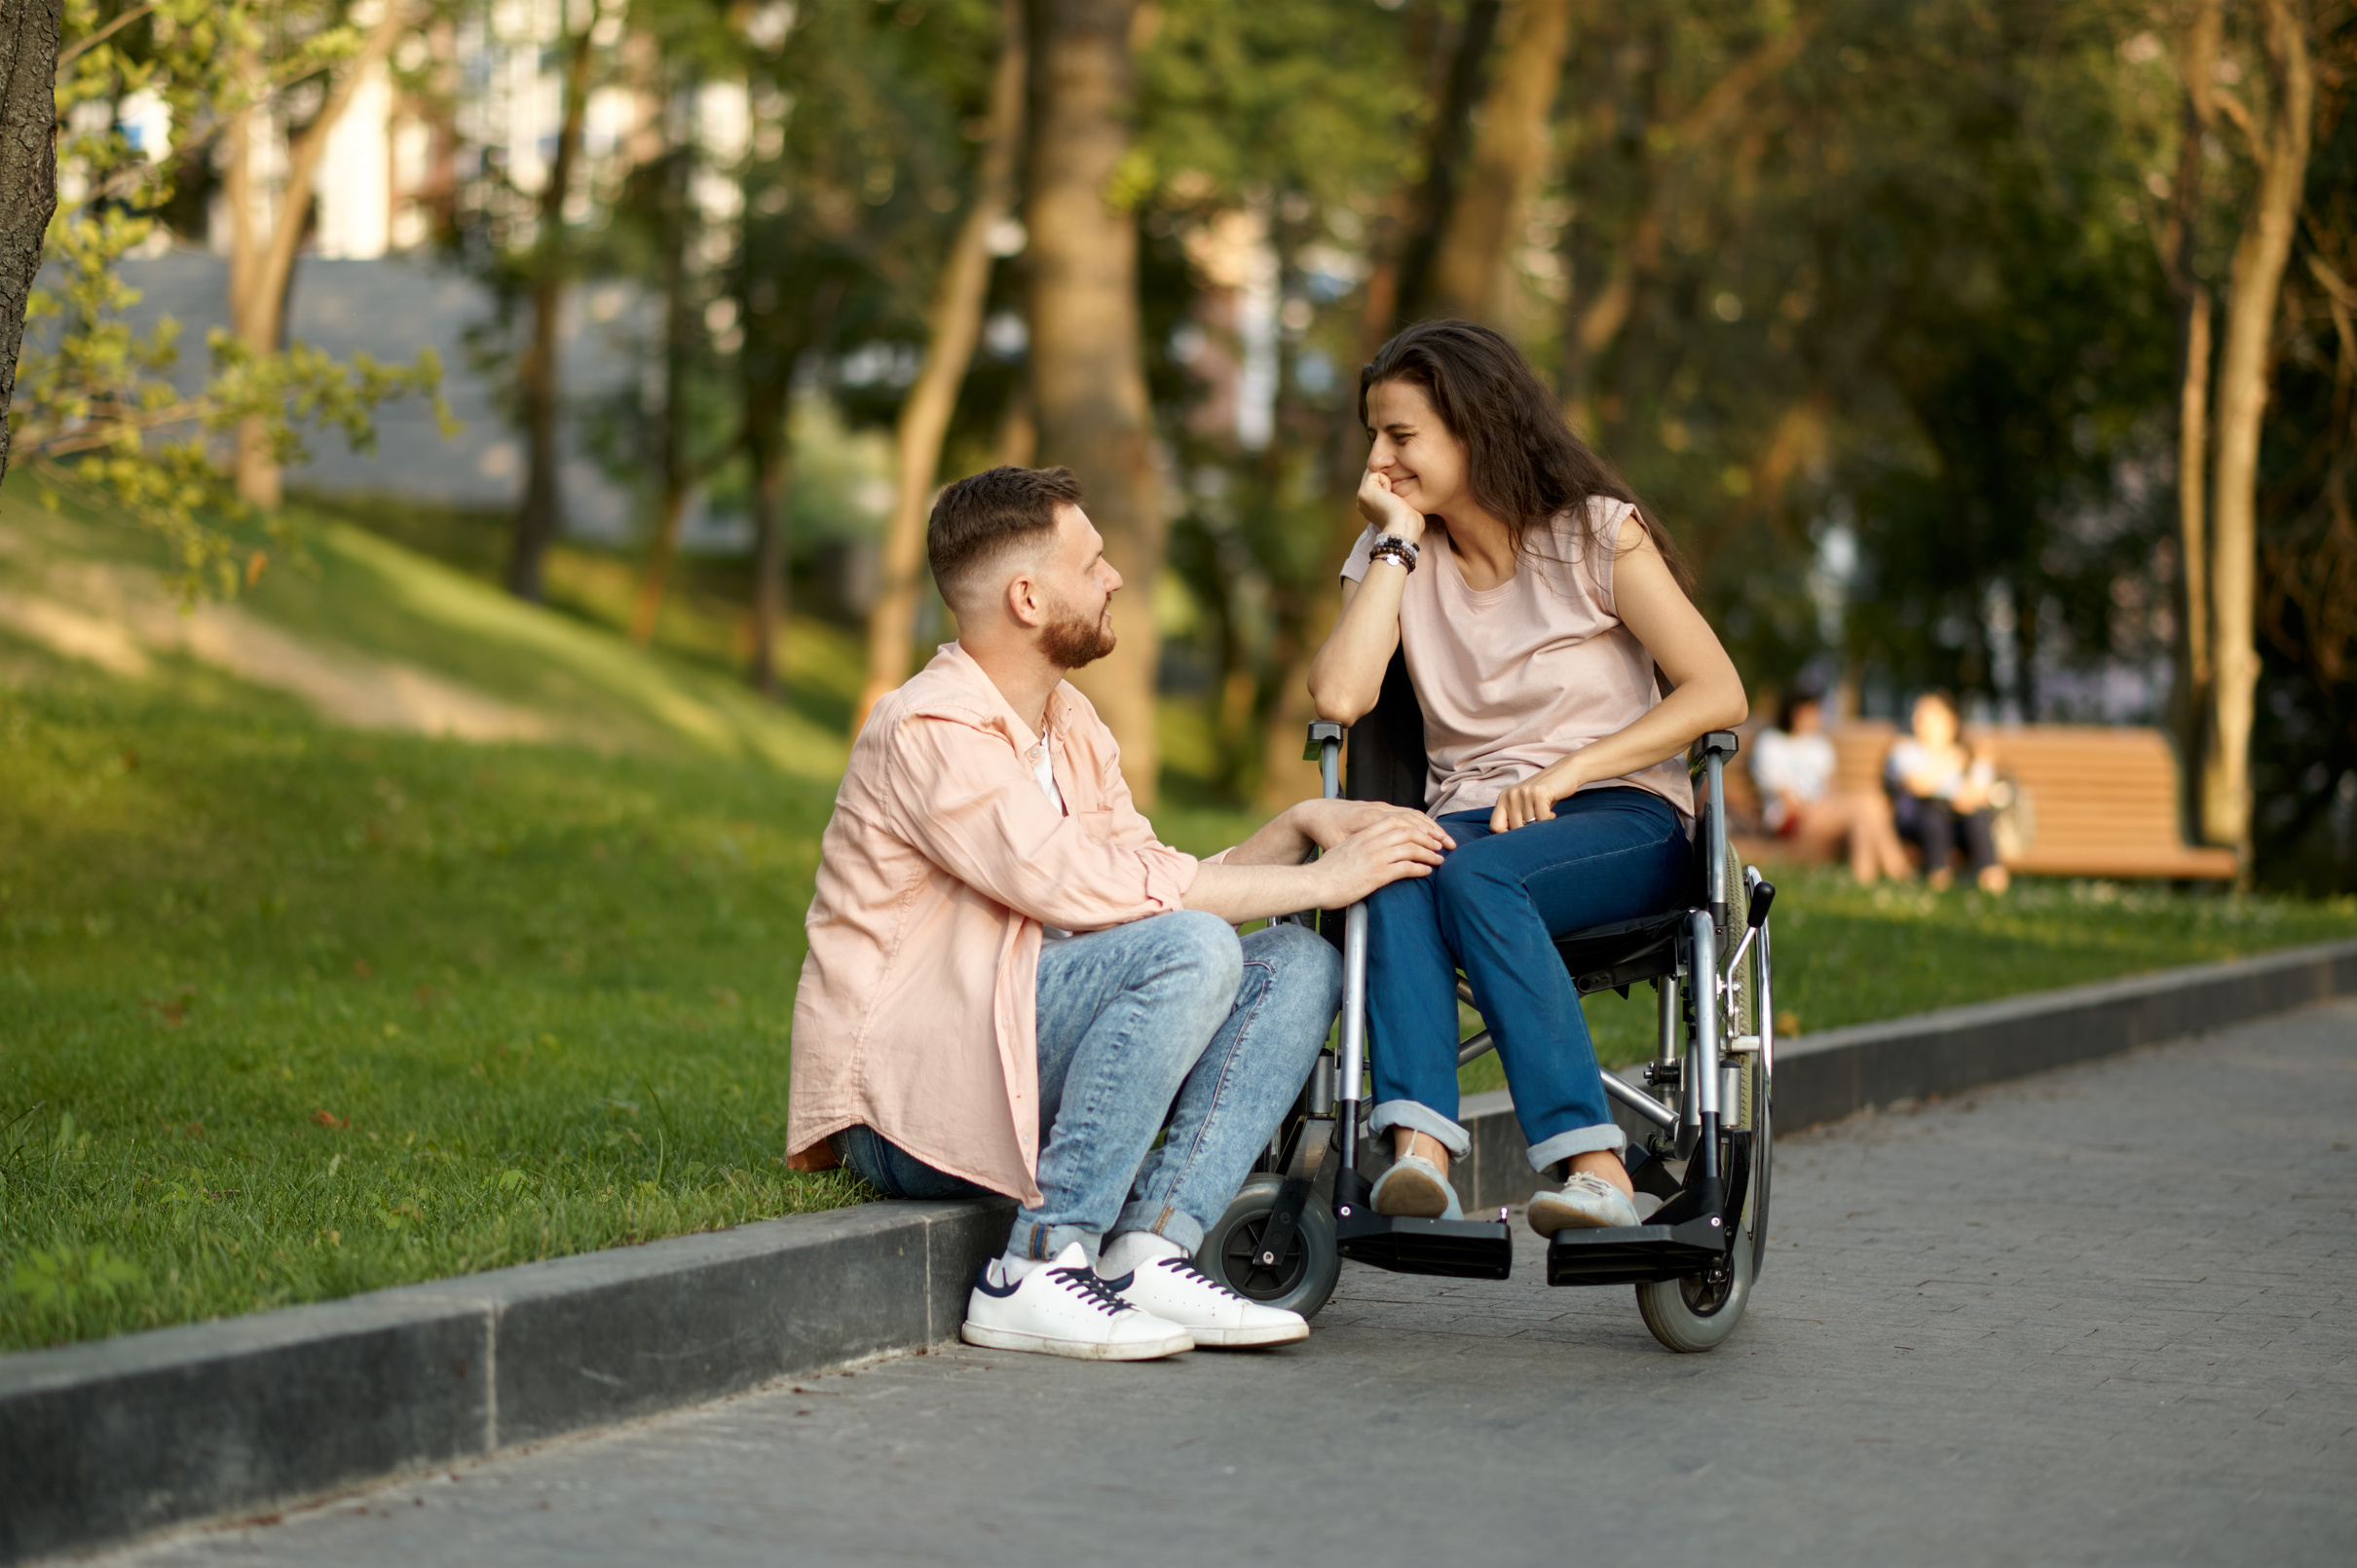 Couple with Wheelchair in Park, Disabled Woman